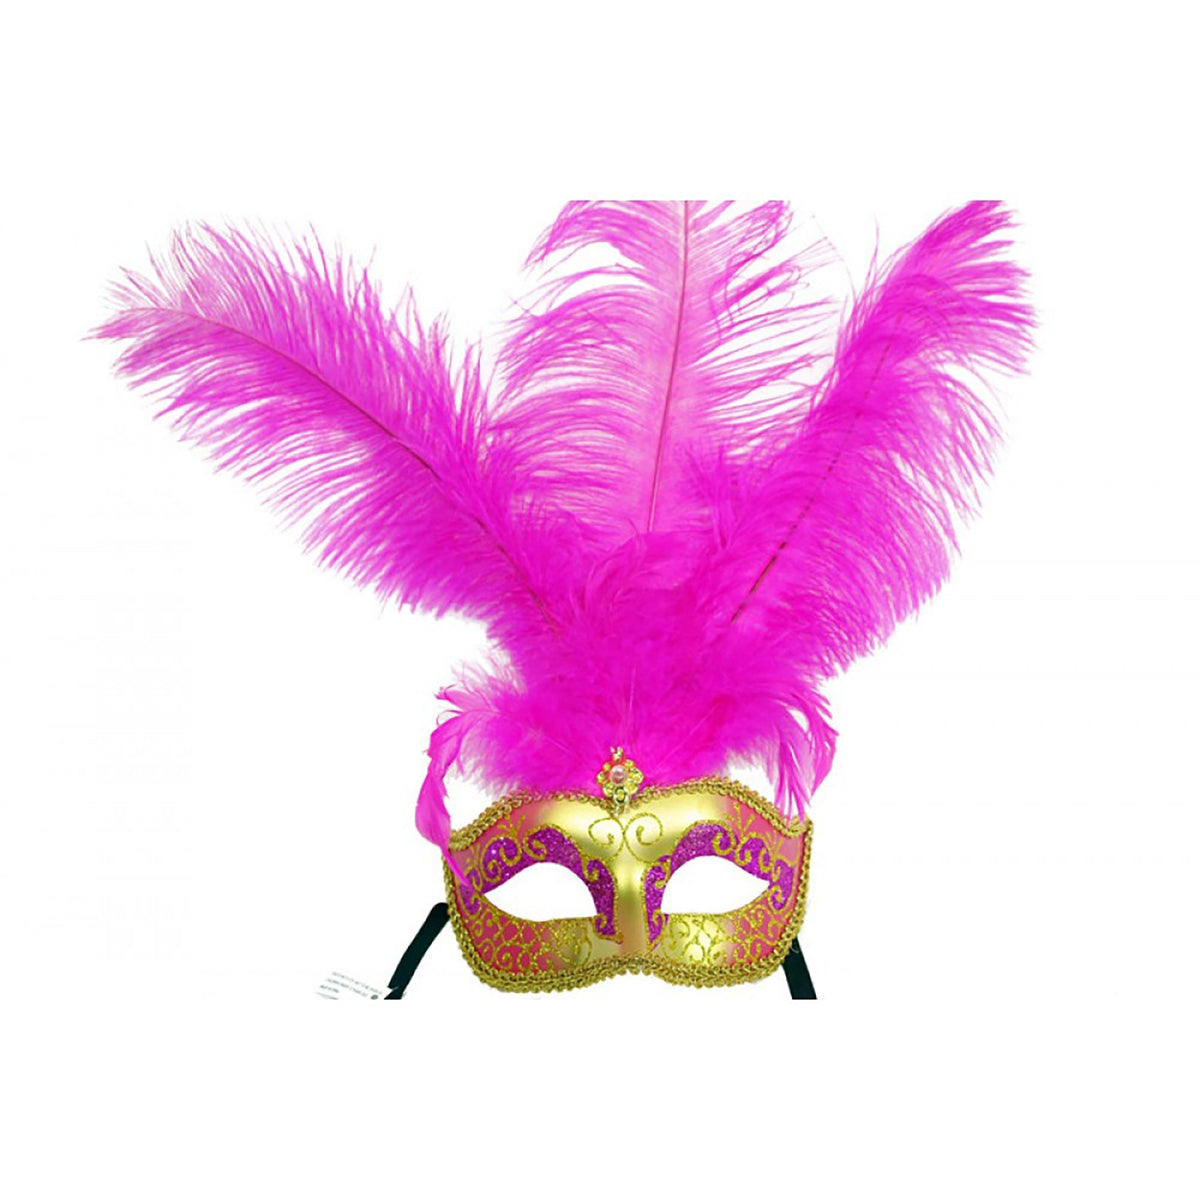 KBW GLOBAL CORP Costume Accessories Gold and Pink Venetian Mask with Ostrich Feathers, 1 Count 831687011450